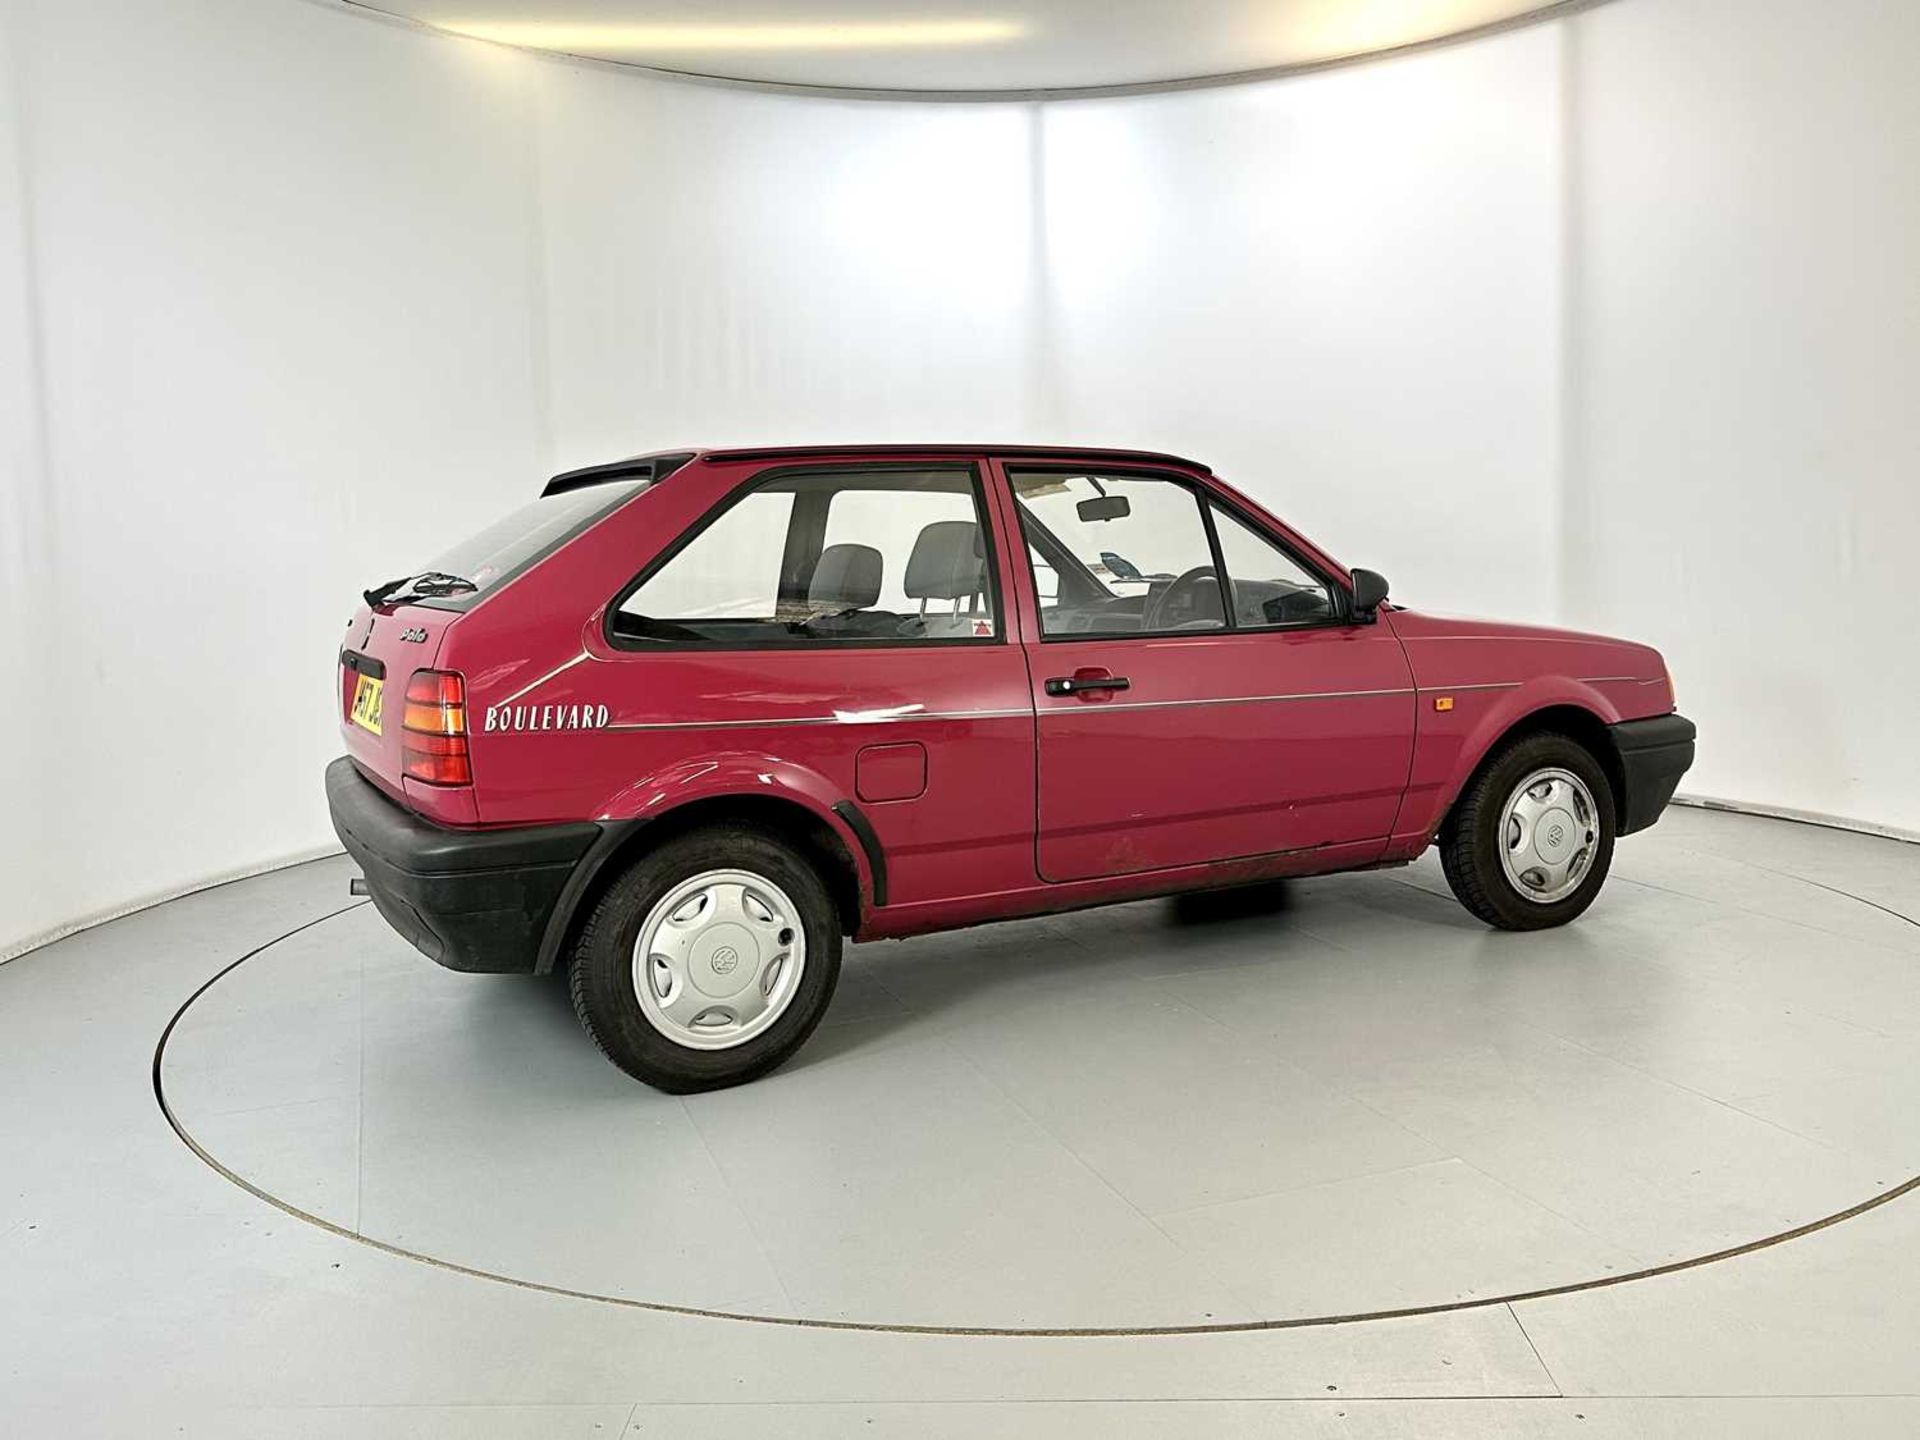 1991 Volkswagen Polo - Image 10 of 29